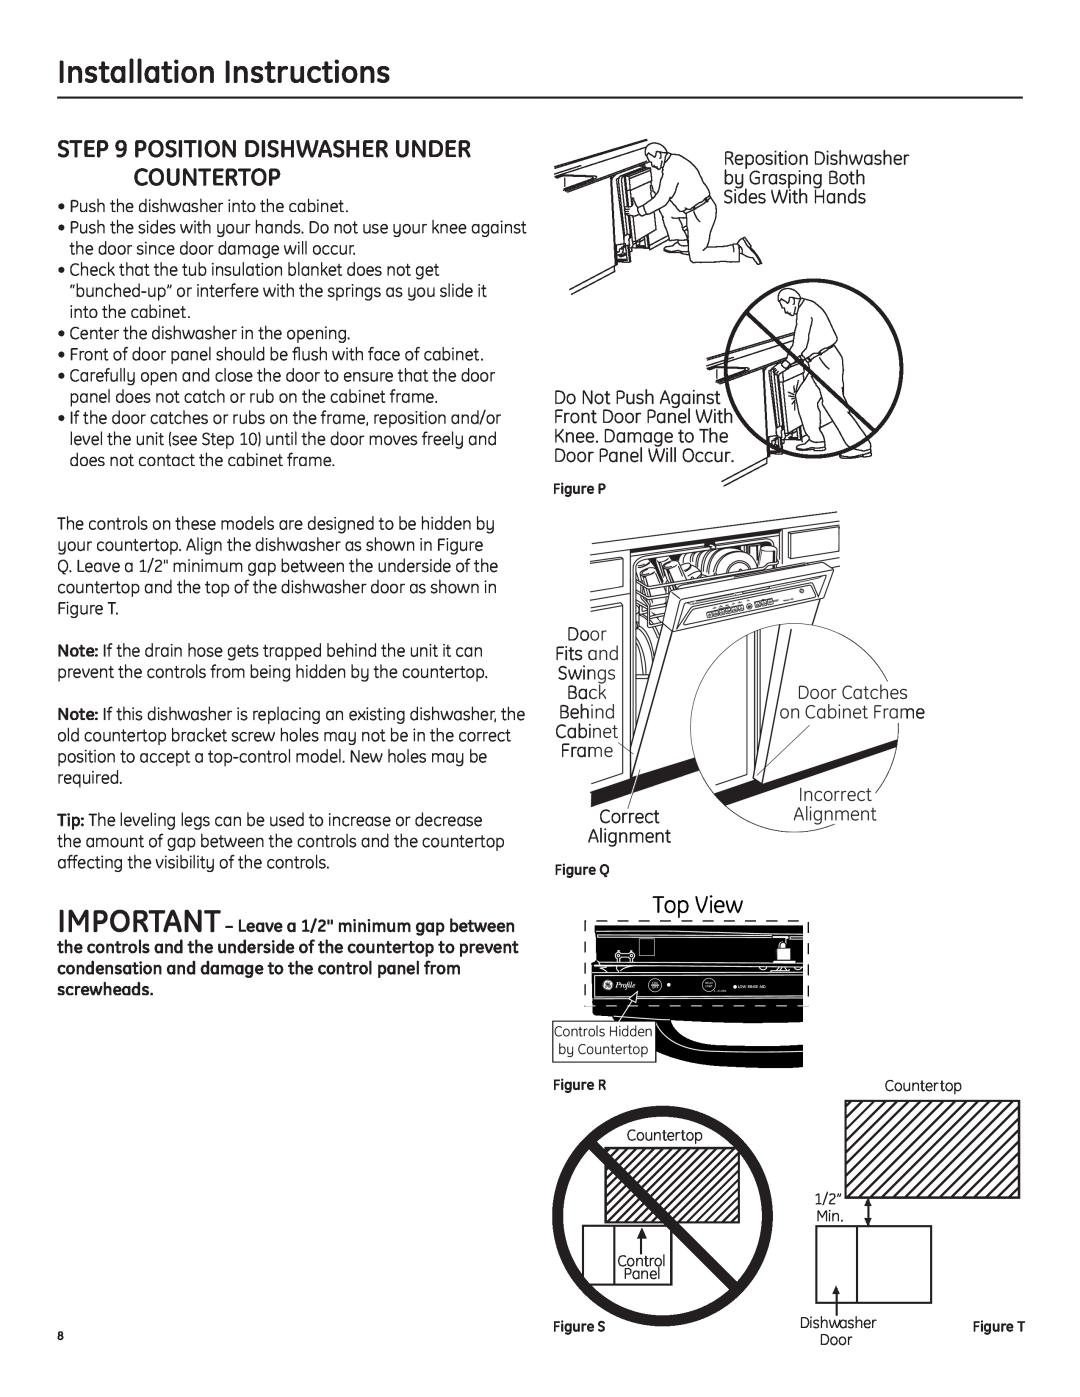 GE Built-In Dishwasher installation instructions Position Dishwasher Under Countertop, Installation Instructions, Top View 